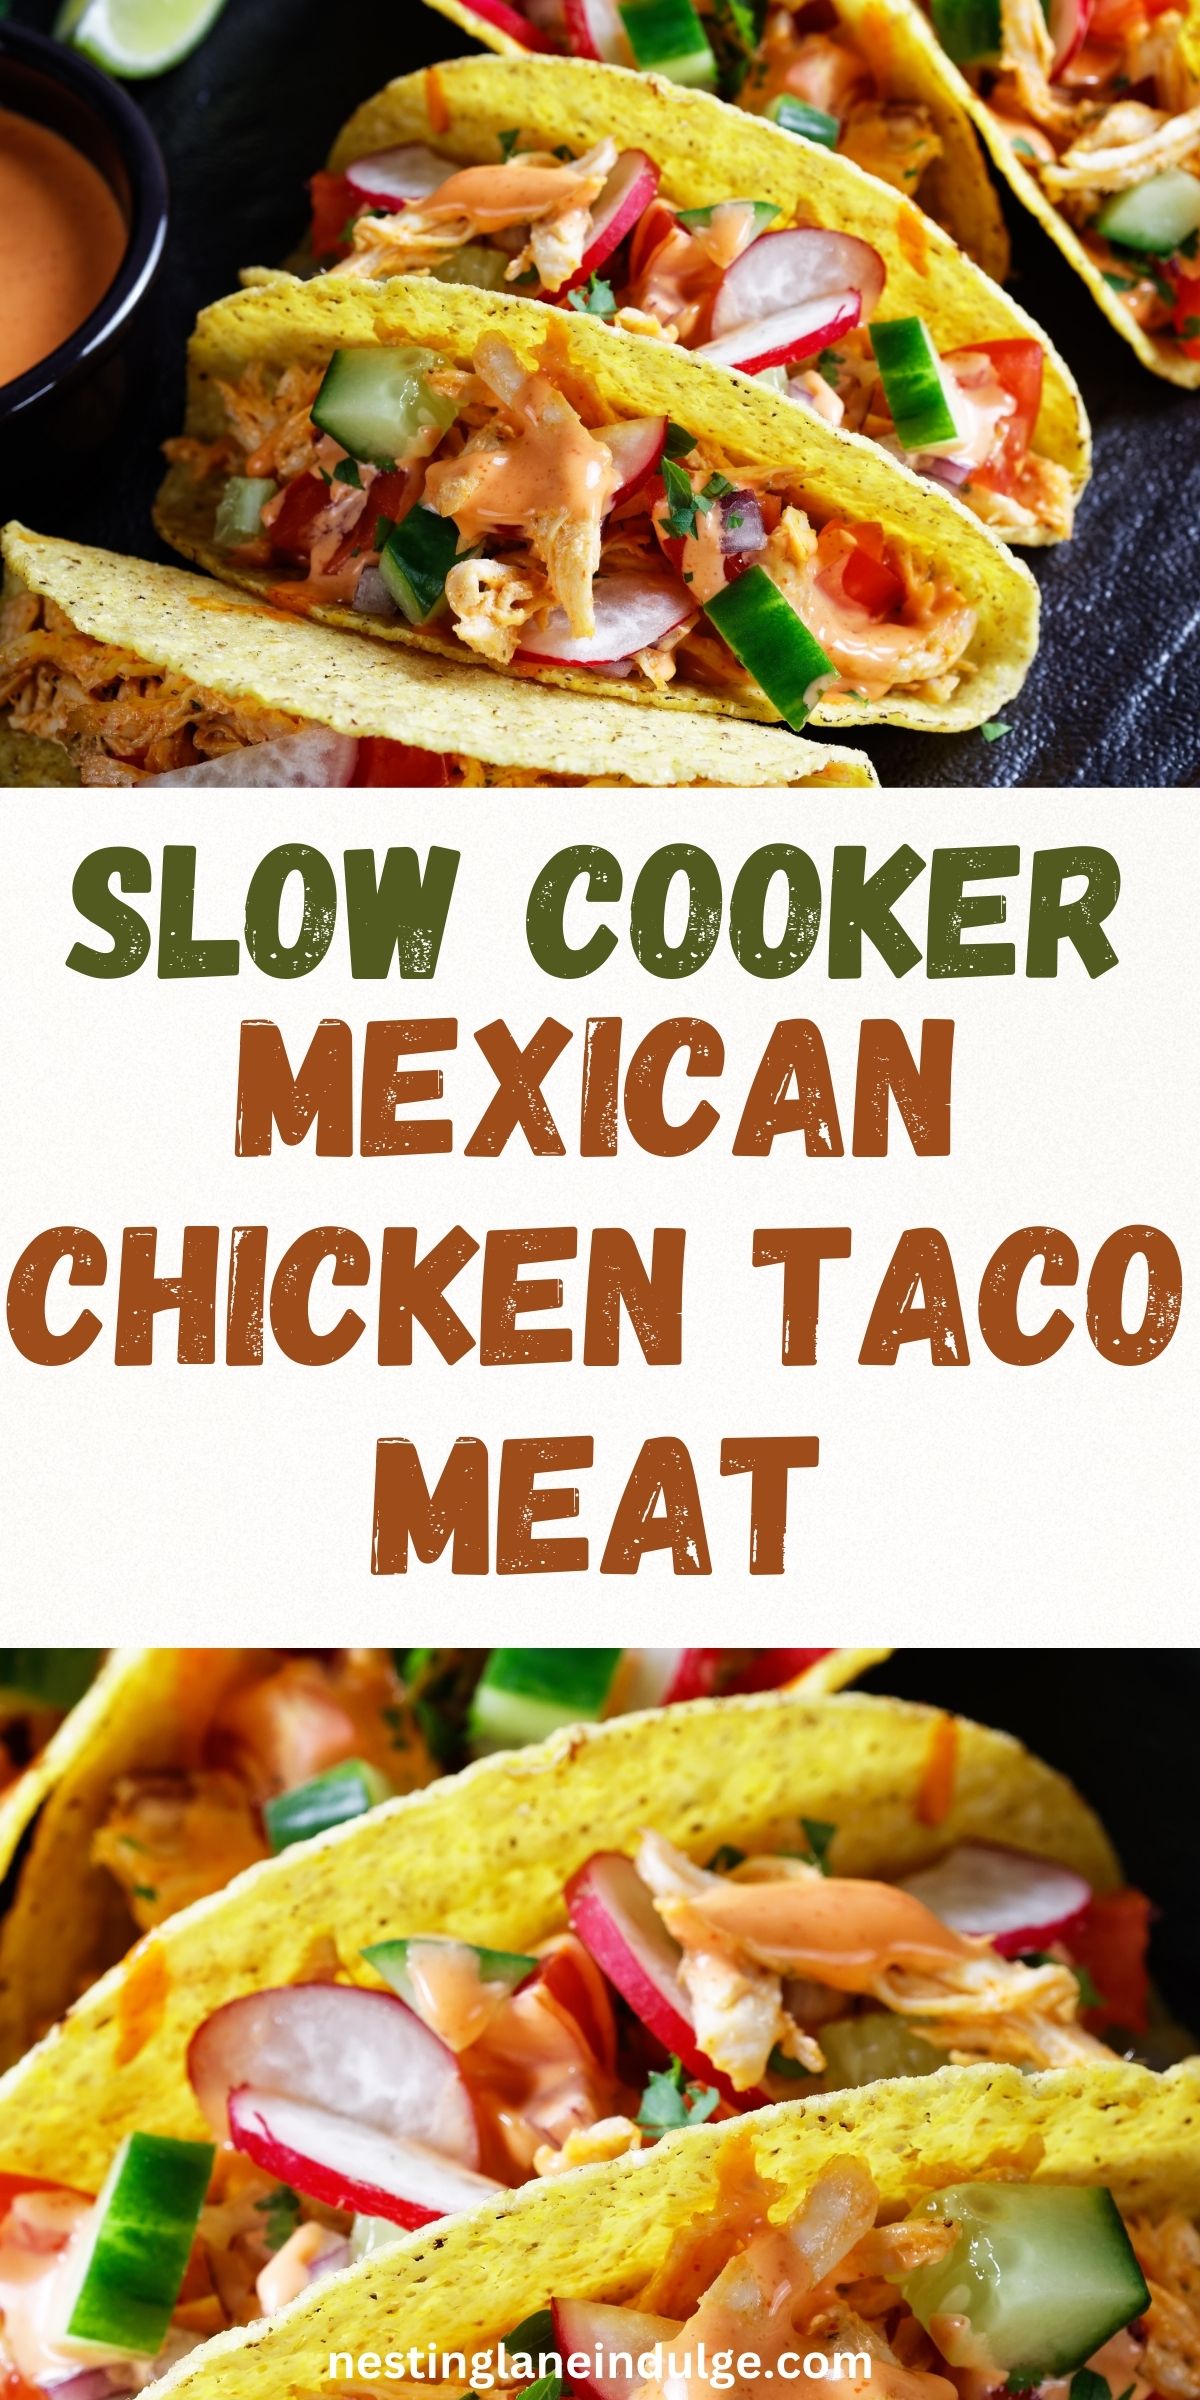 Slow Cooker Mexican Chicken Taco Meat Graphic.